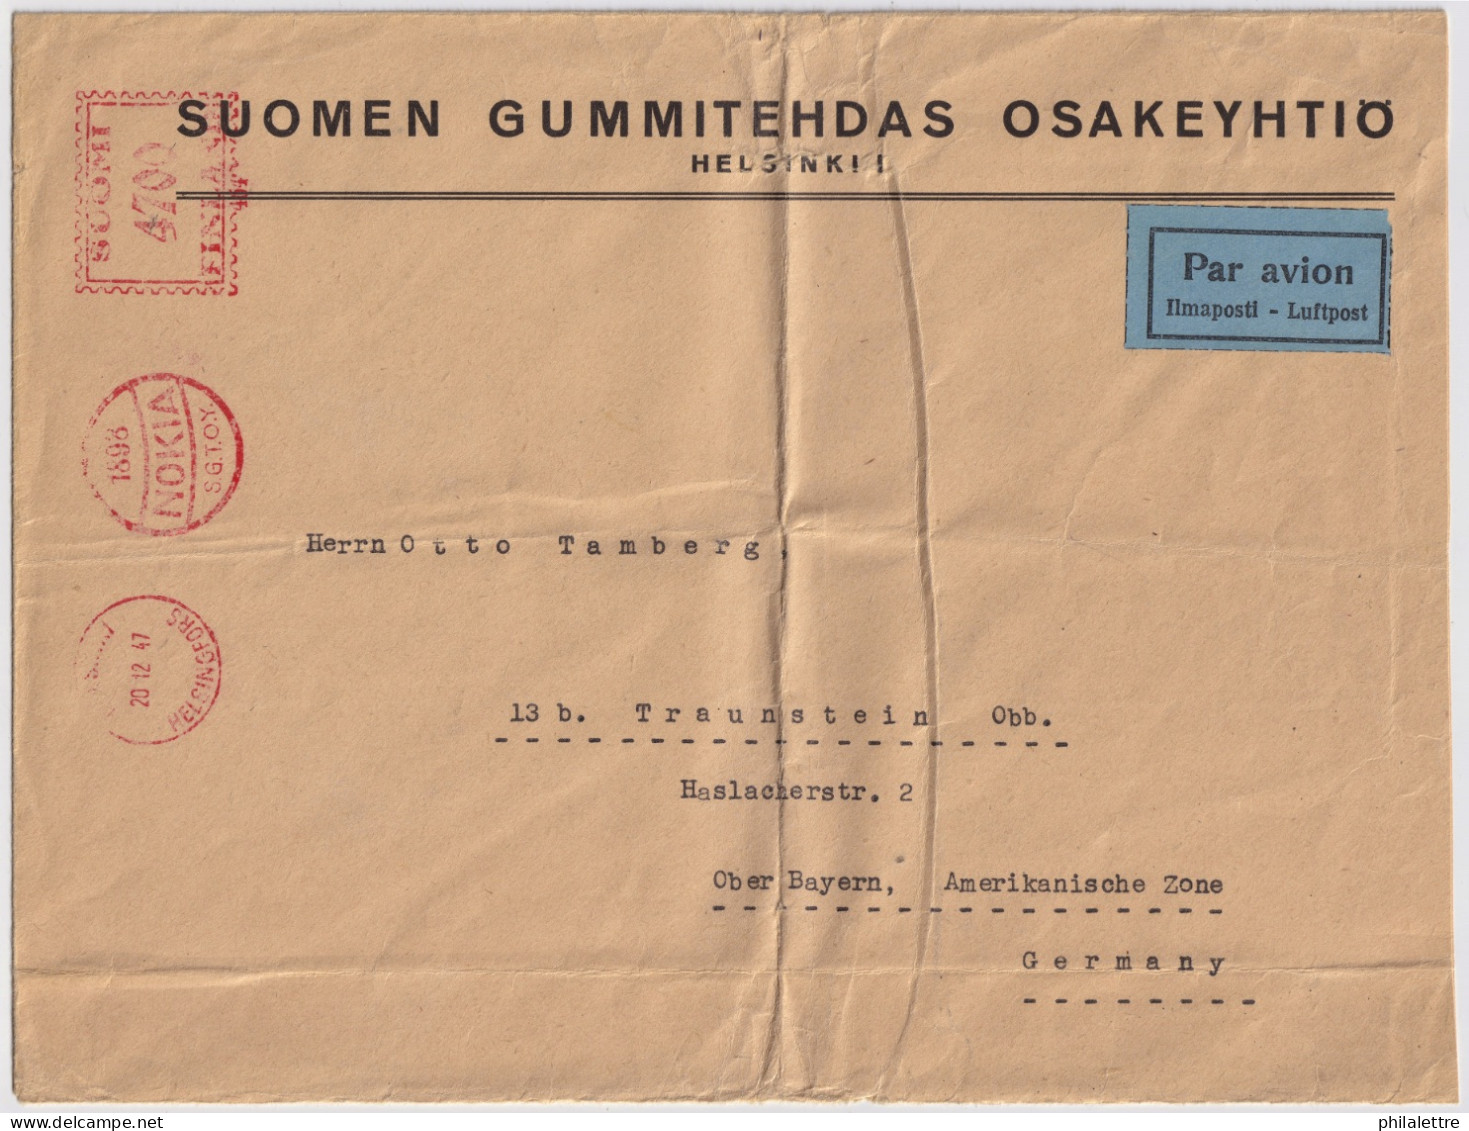 FINLAND - 1947 - "1898 / NOKIA / S.G..O.Y." Franking Mark (4700p) On Air Mail Cover To Germany - Storia Postale